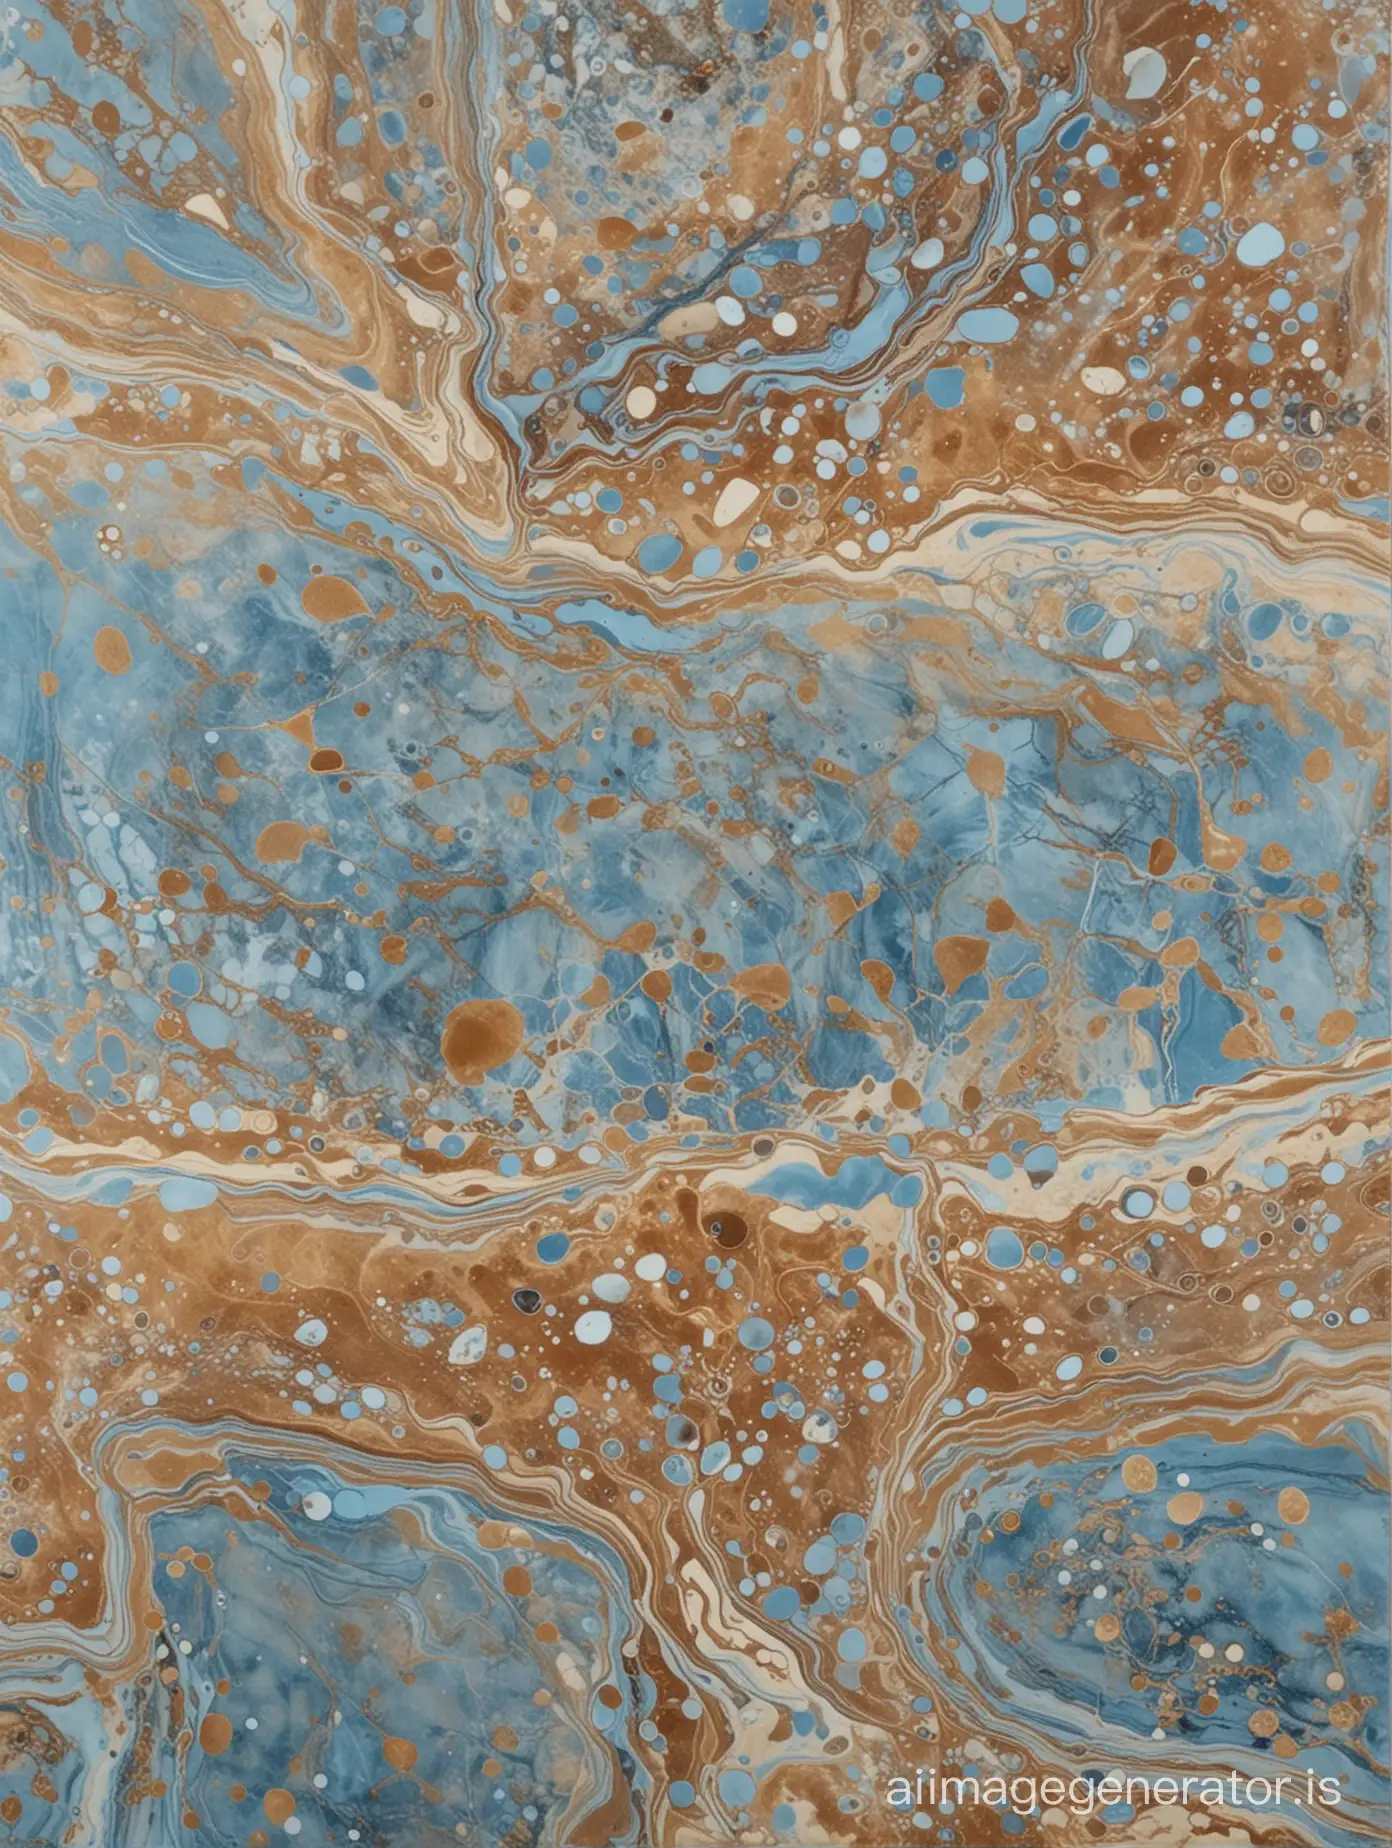 Imitation-Onyx-in-Blue-Brown-and-Light-Brown-Tones-with-Marbled-Appearance